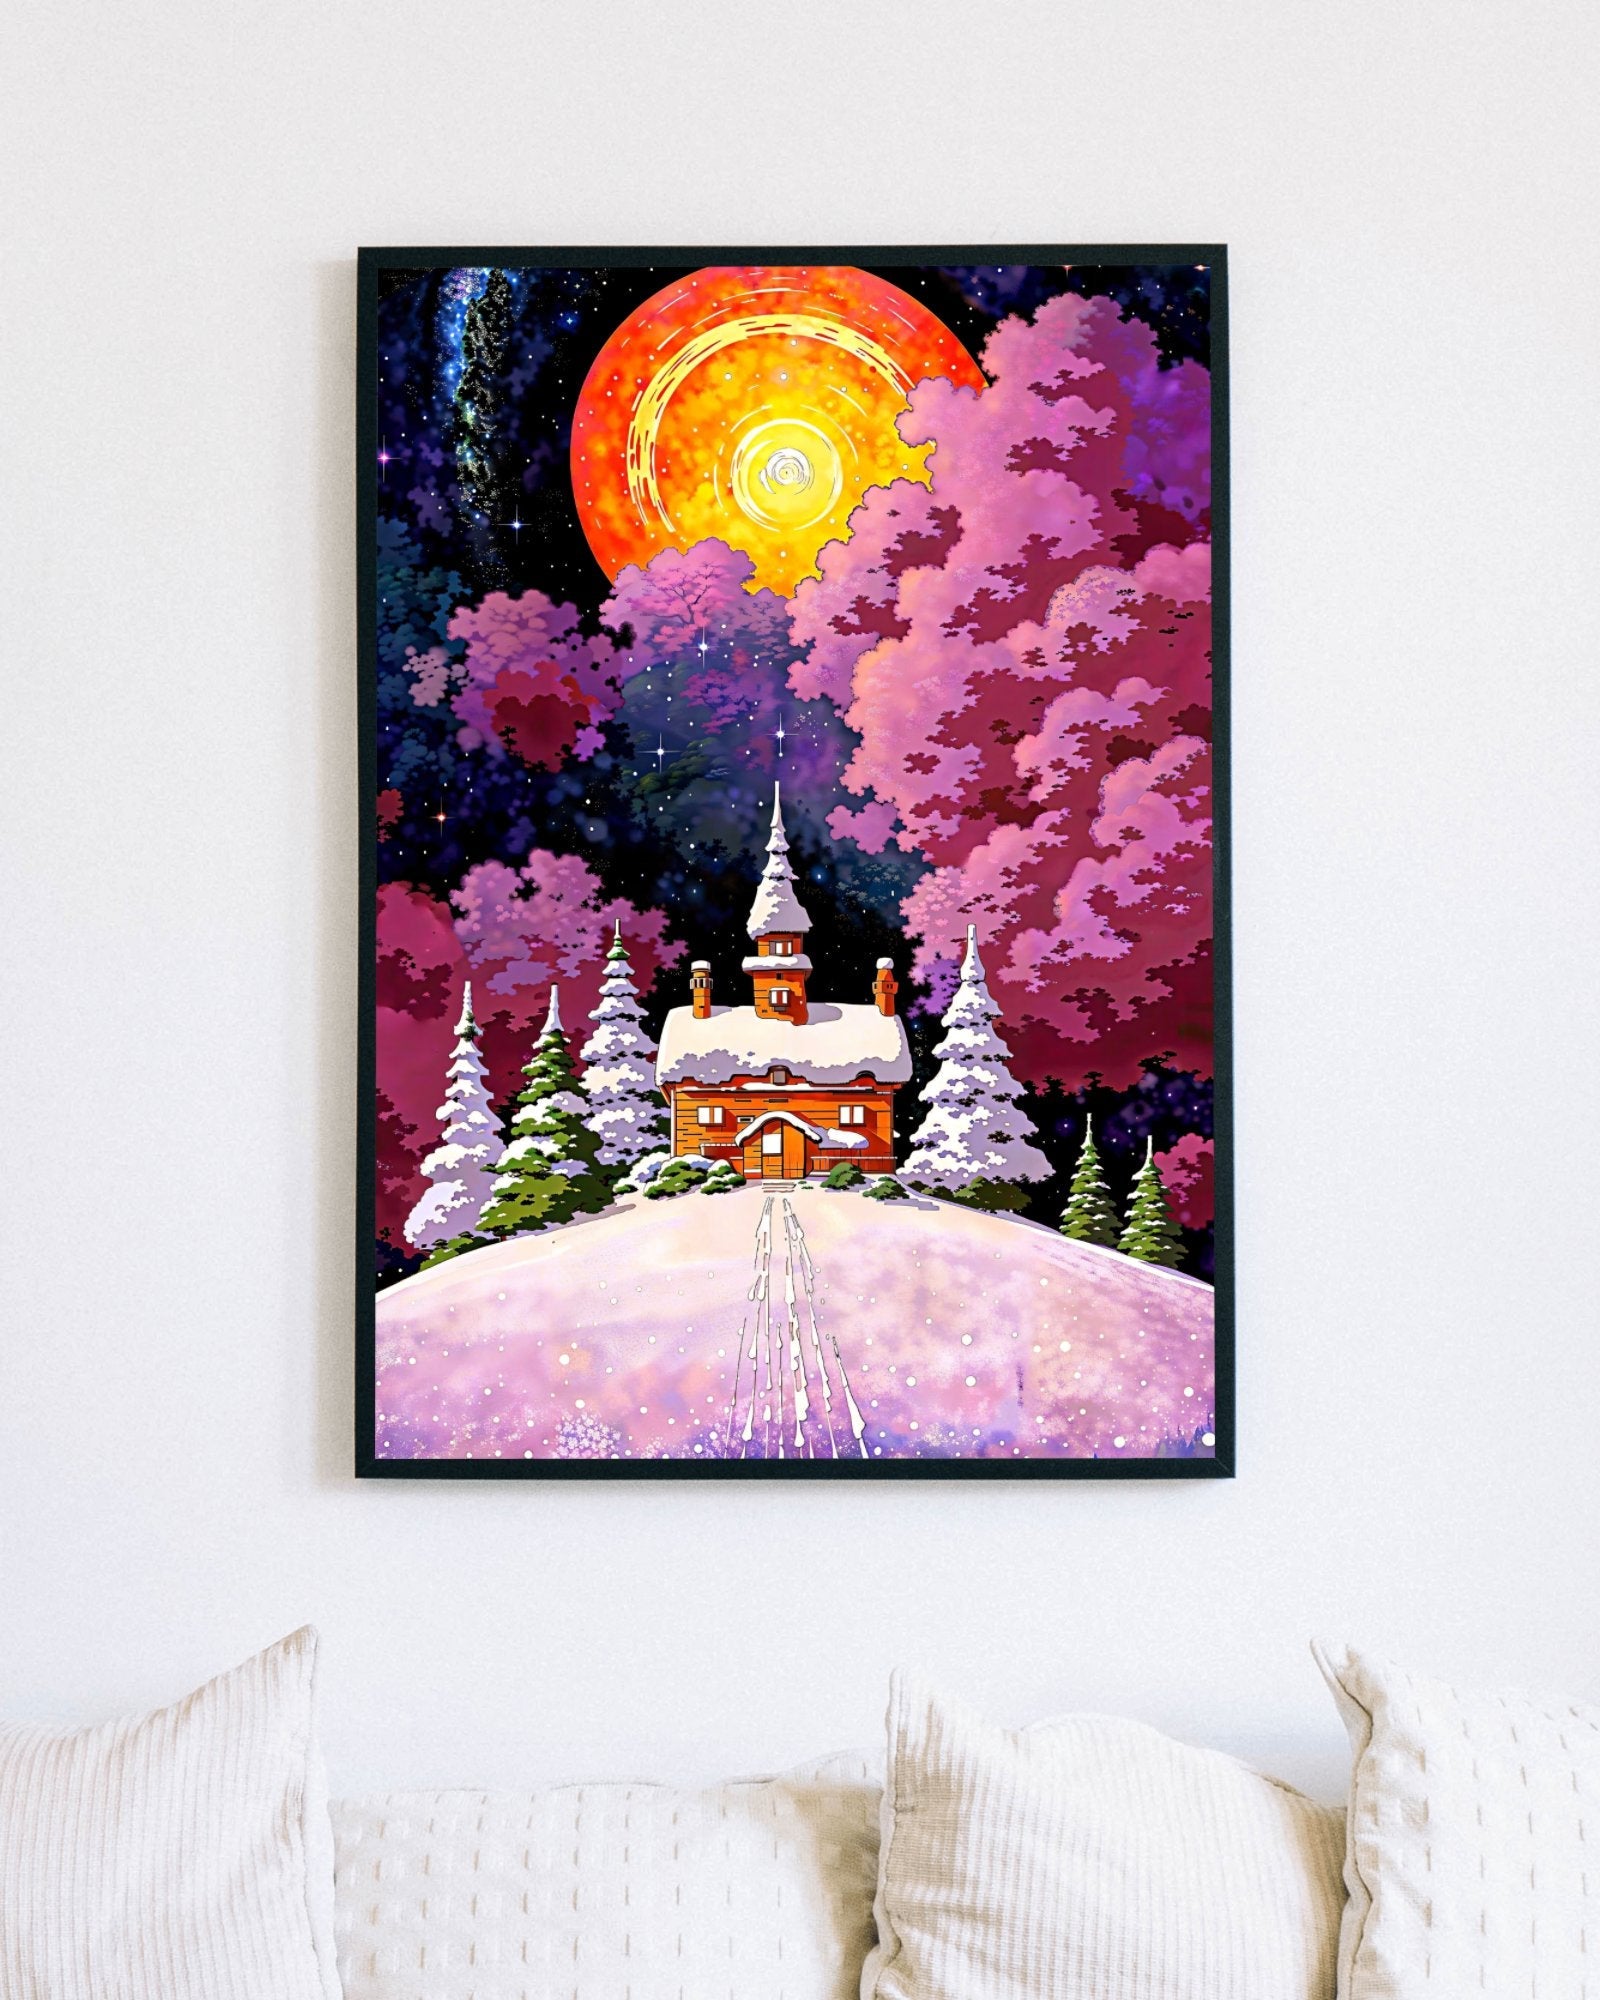 Cozy winter time - Poster - Ever colorful